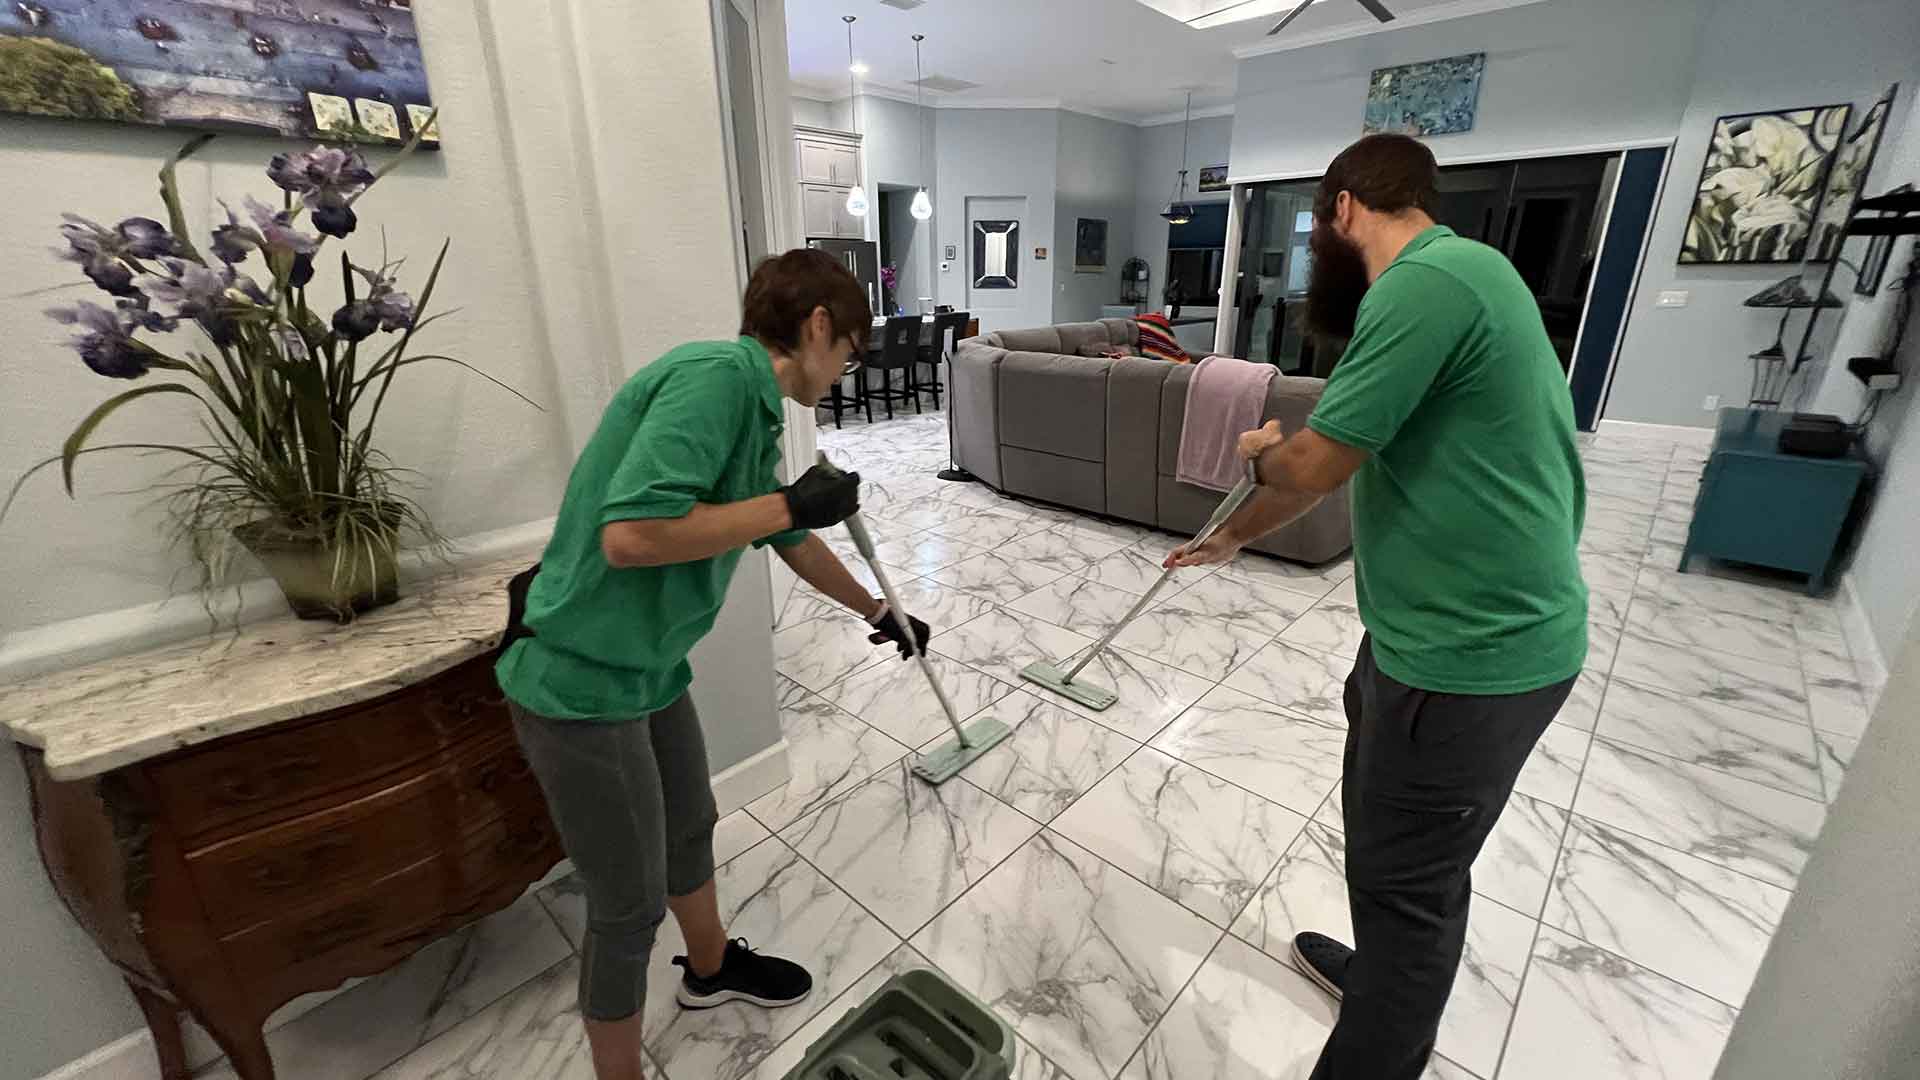 House deep cleaning - Jan 11 | Goldmillio cleaning service in Cape Coral | clean the floor